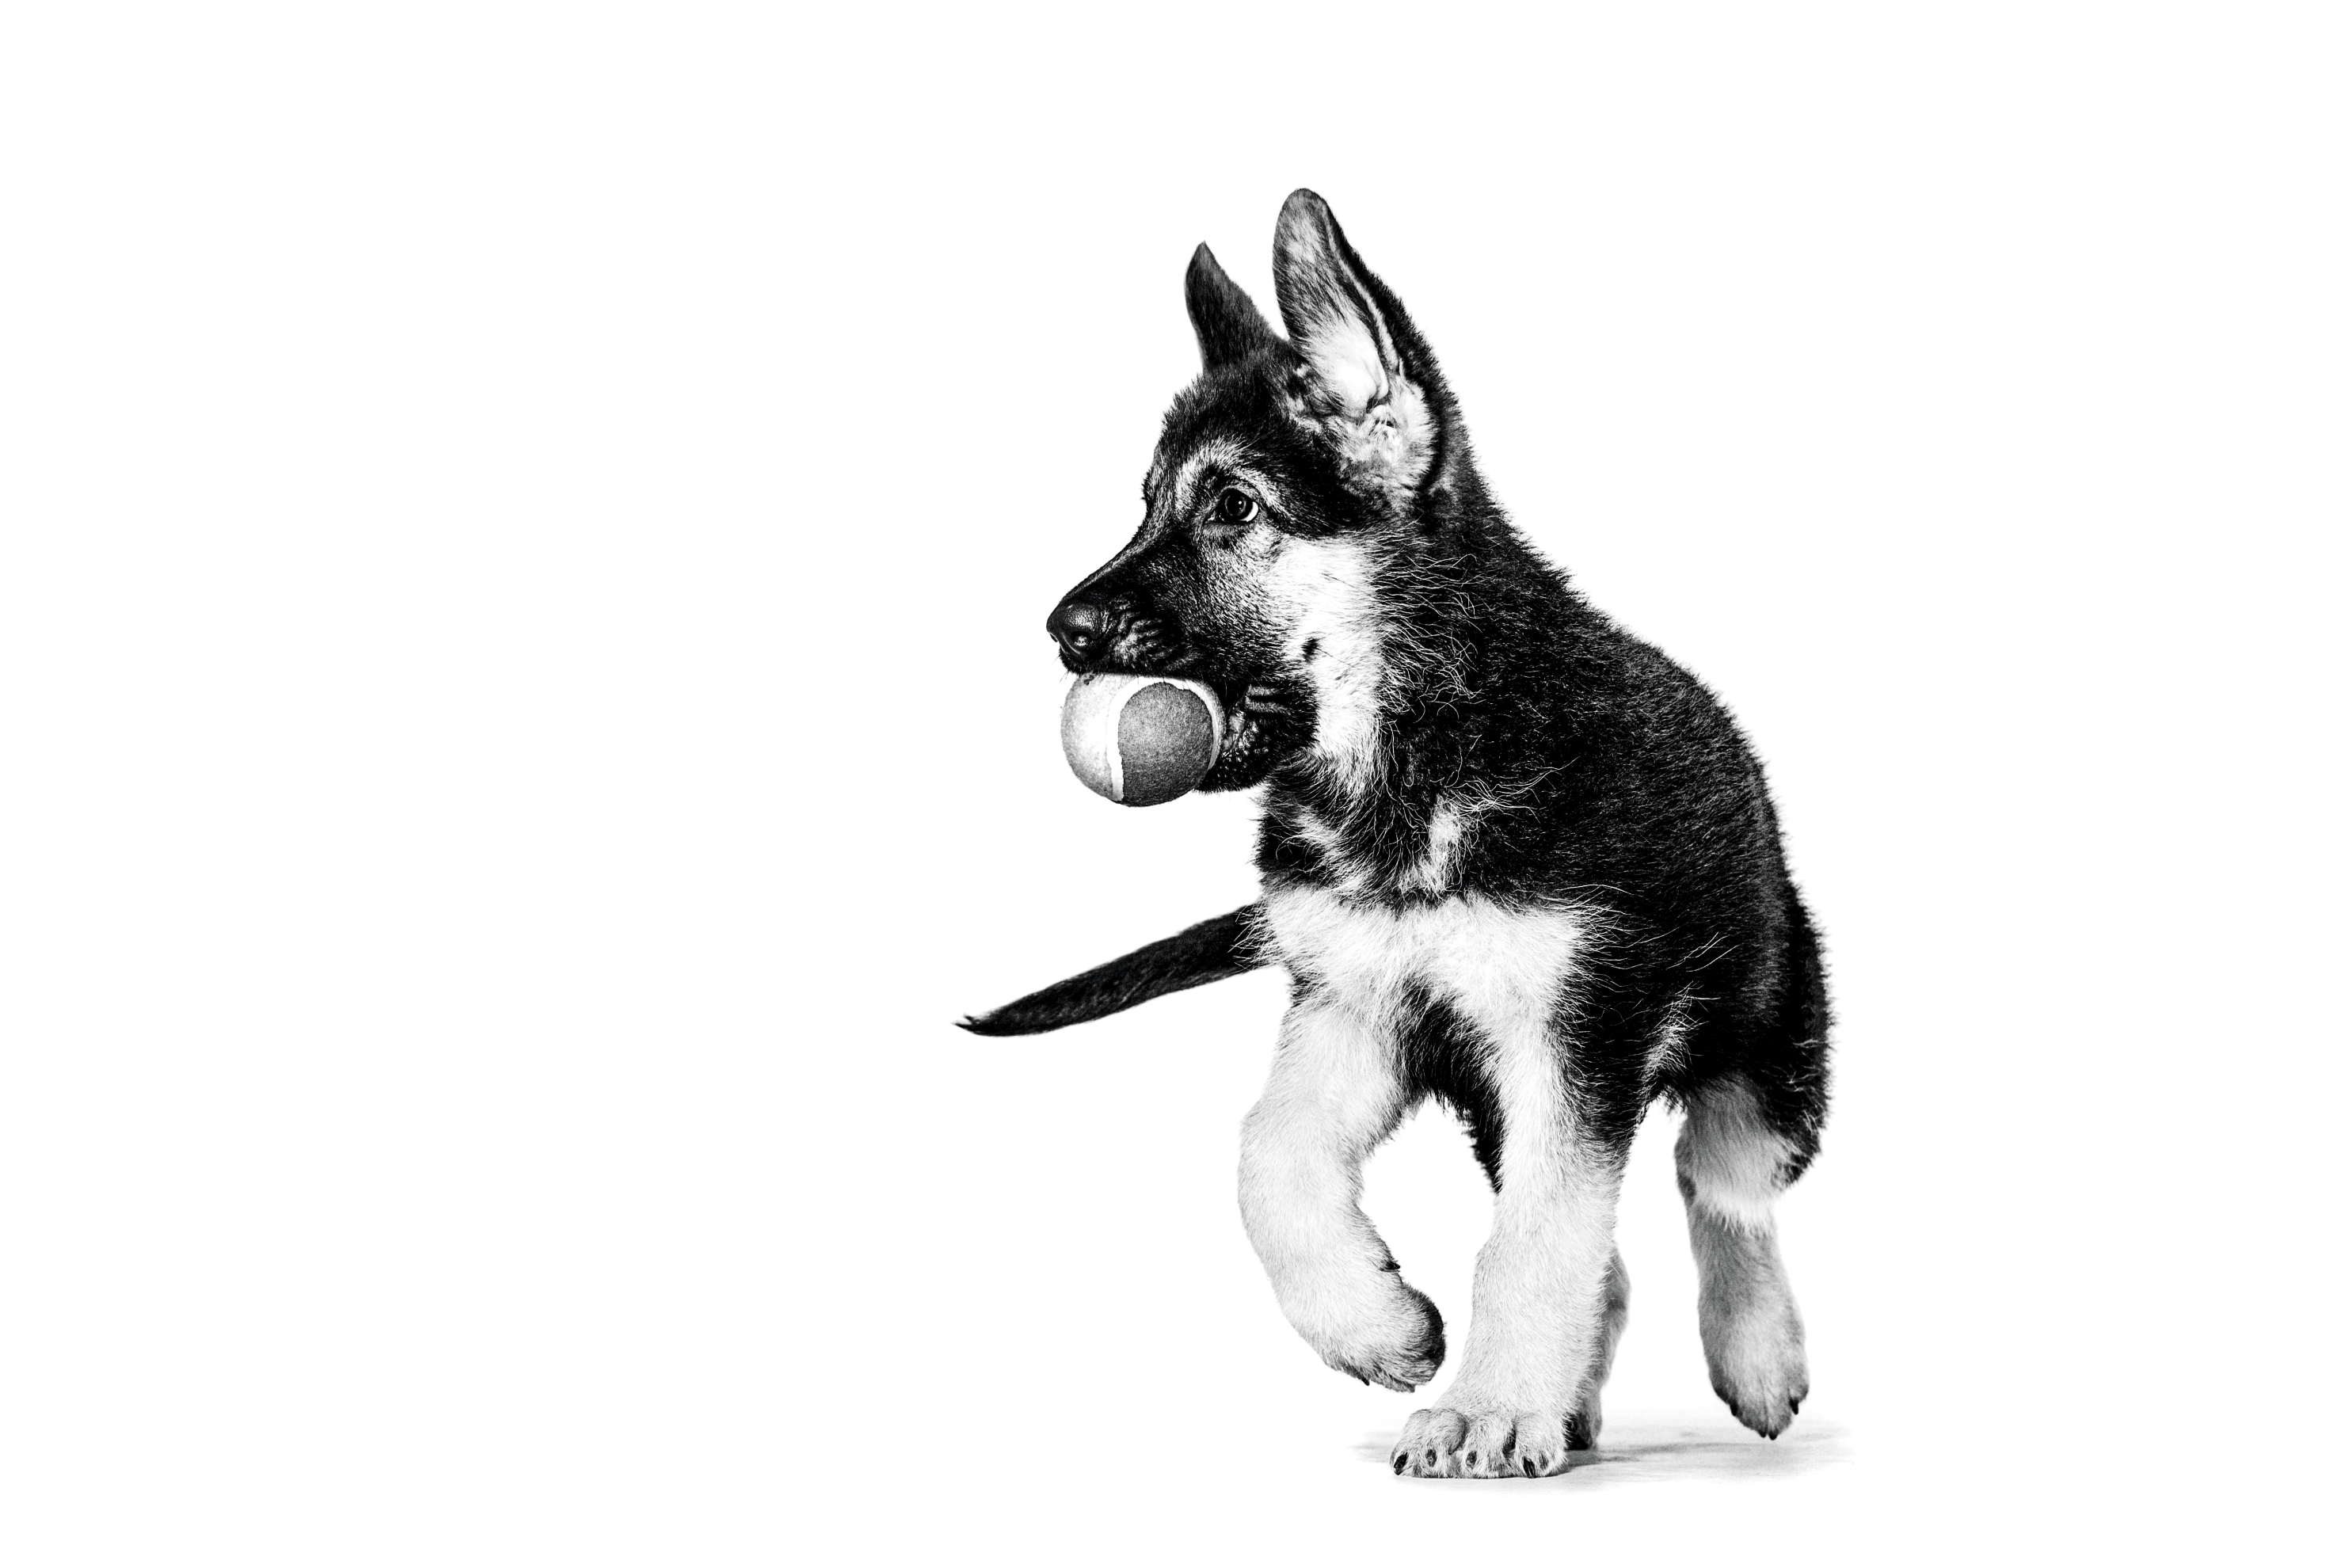 German Shepherd puppy in black and white on a white background with a ball in its mouth